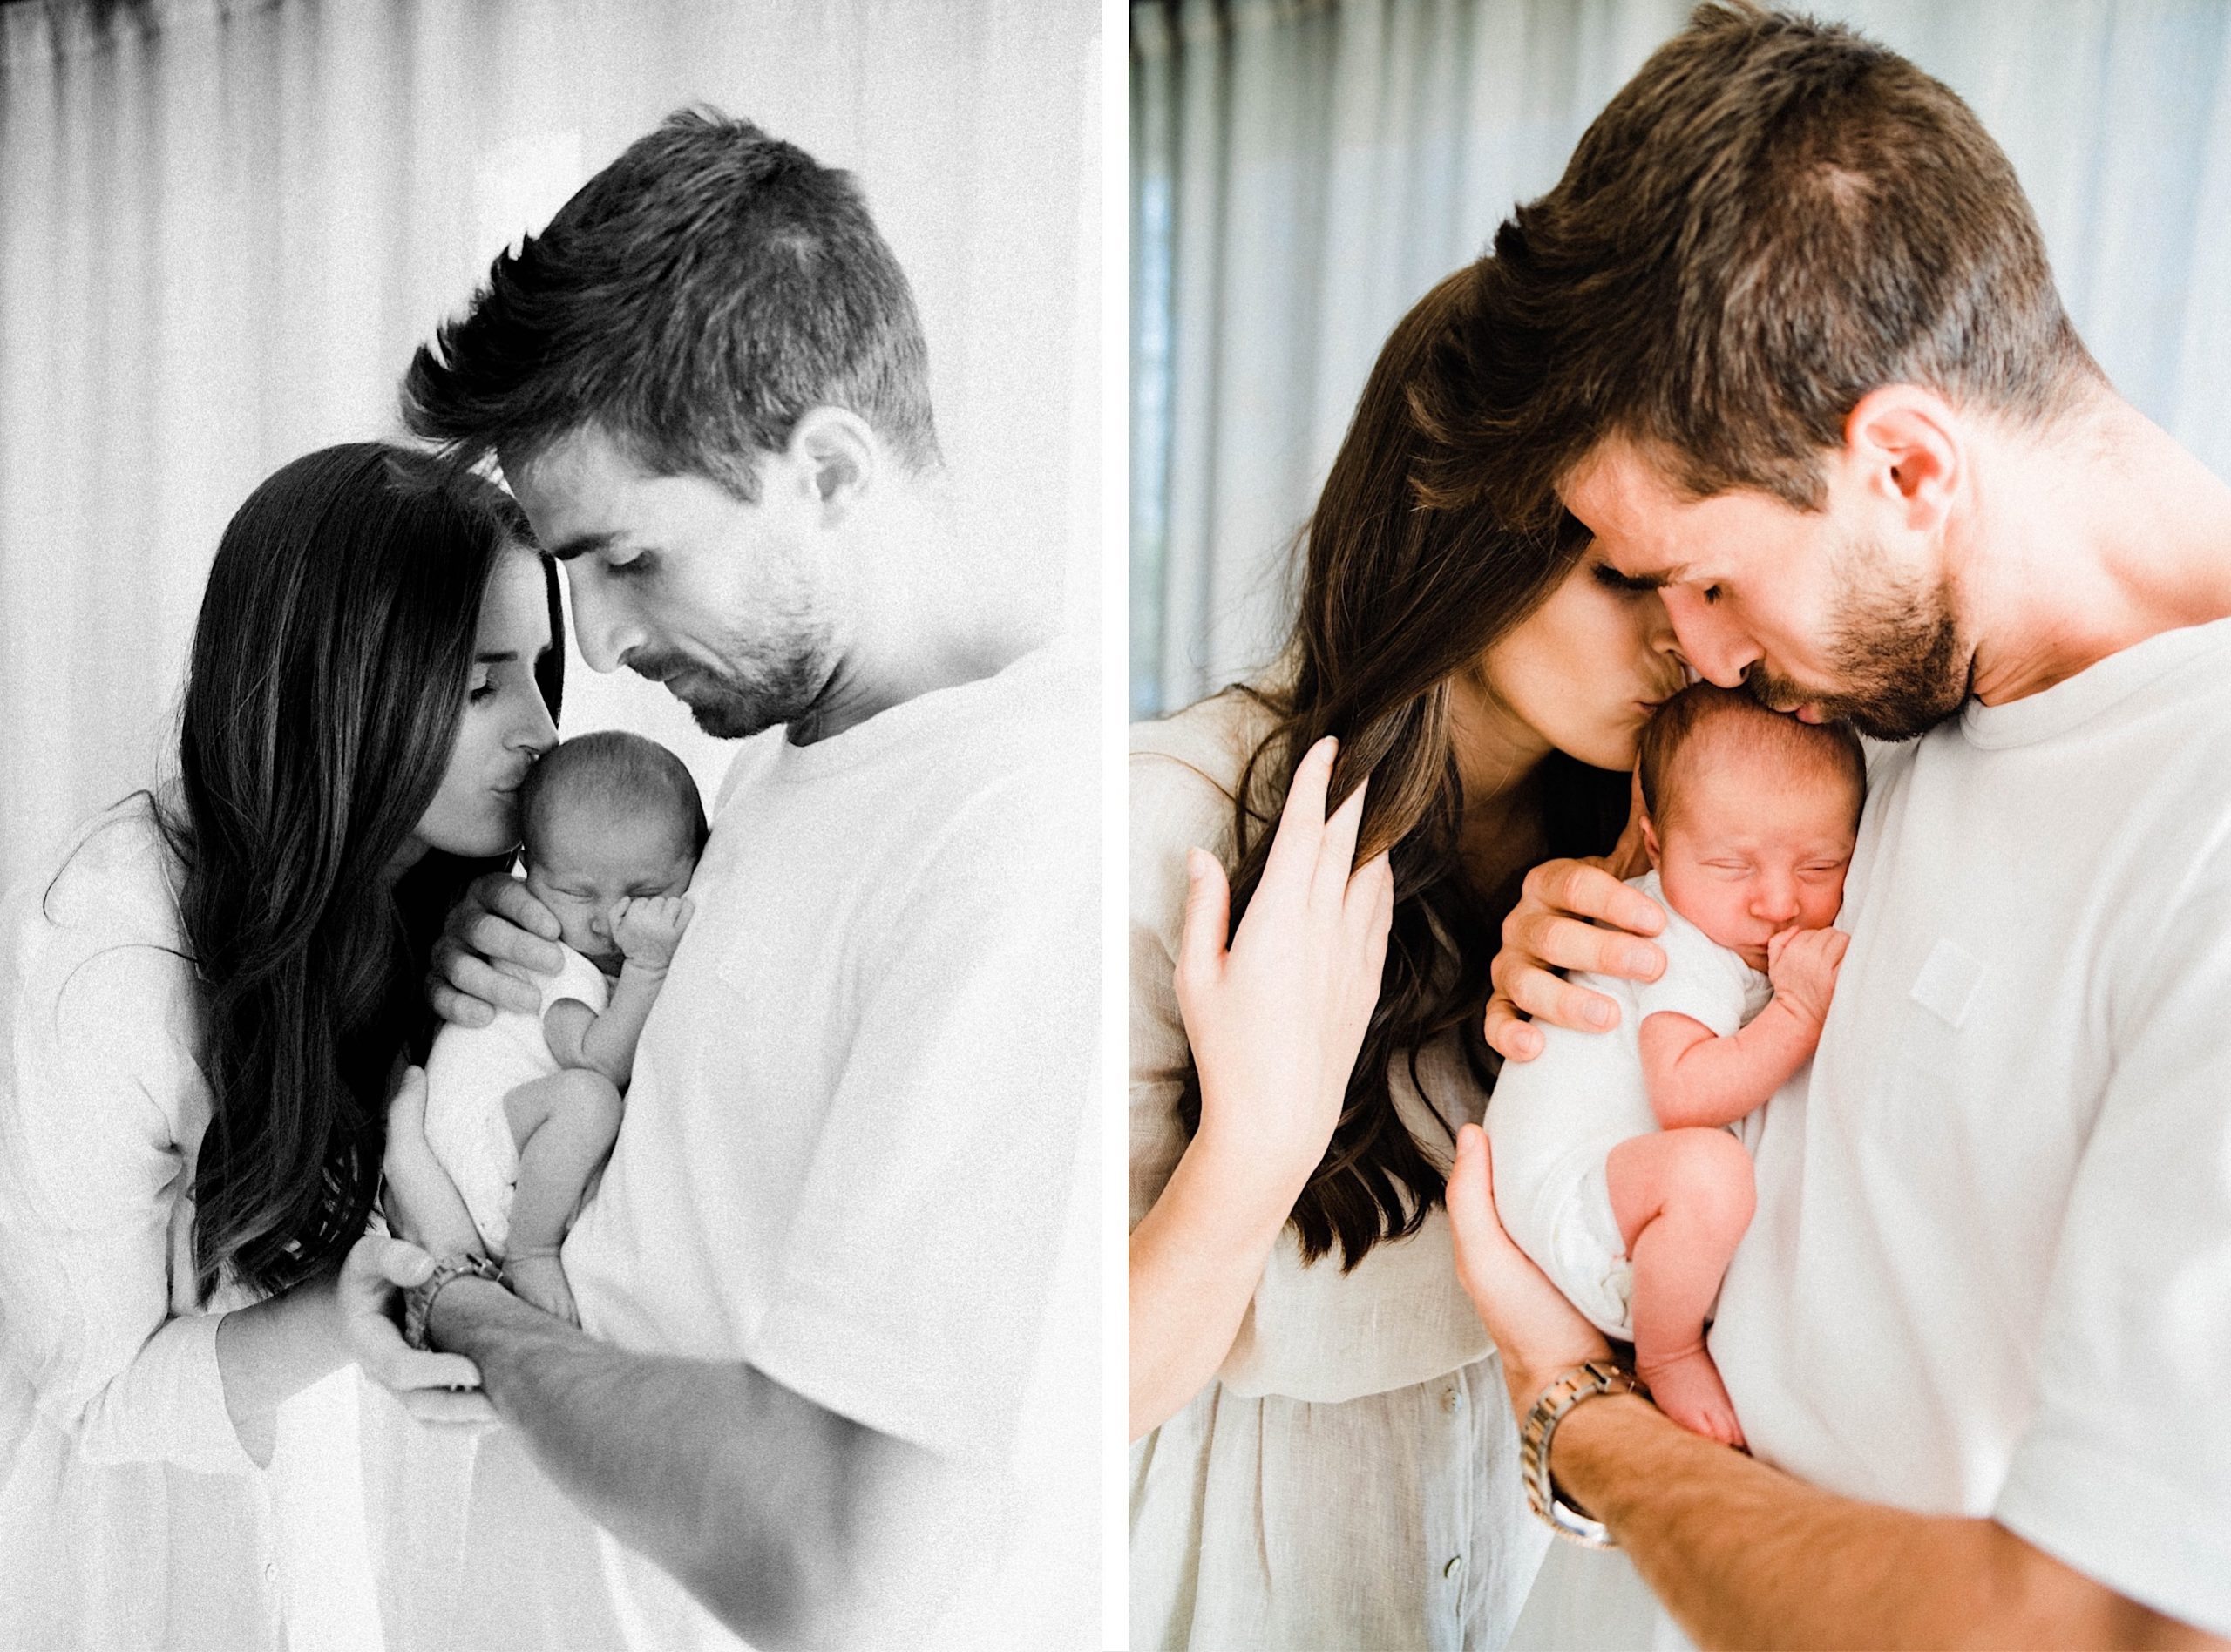 Two Natural Newborn Portraits side-by-side of a new Mum & Dad cuddling their new baby. The photo on the left is black & white.